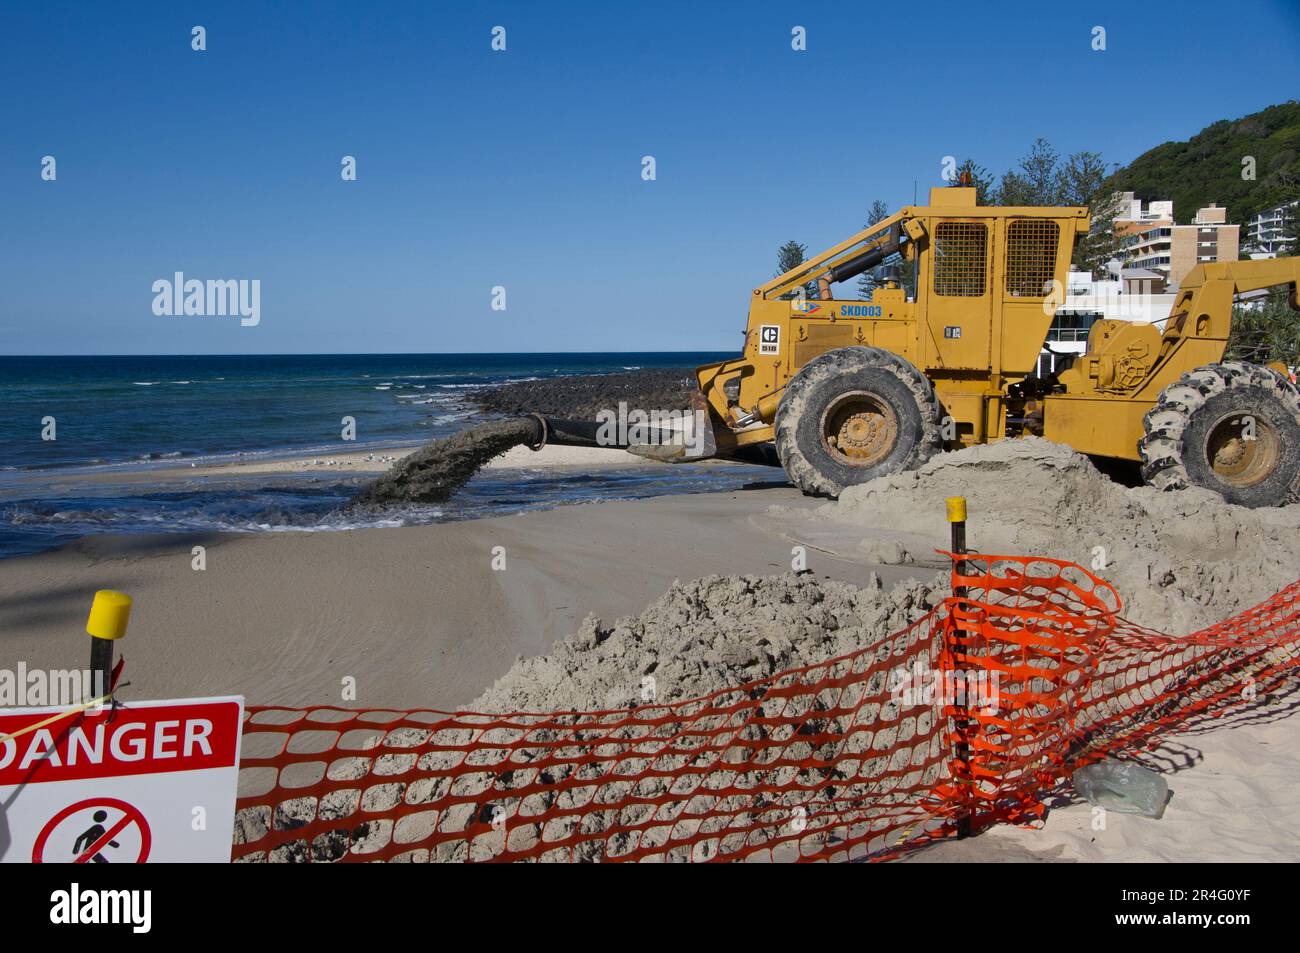 Sand pumping on Burleigh beach on Gold Coast, Australia. Annual beach repair and sand replemishment. Yellow pump vehicle. Beach fenced off for work. Stock Photo